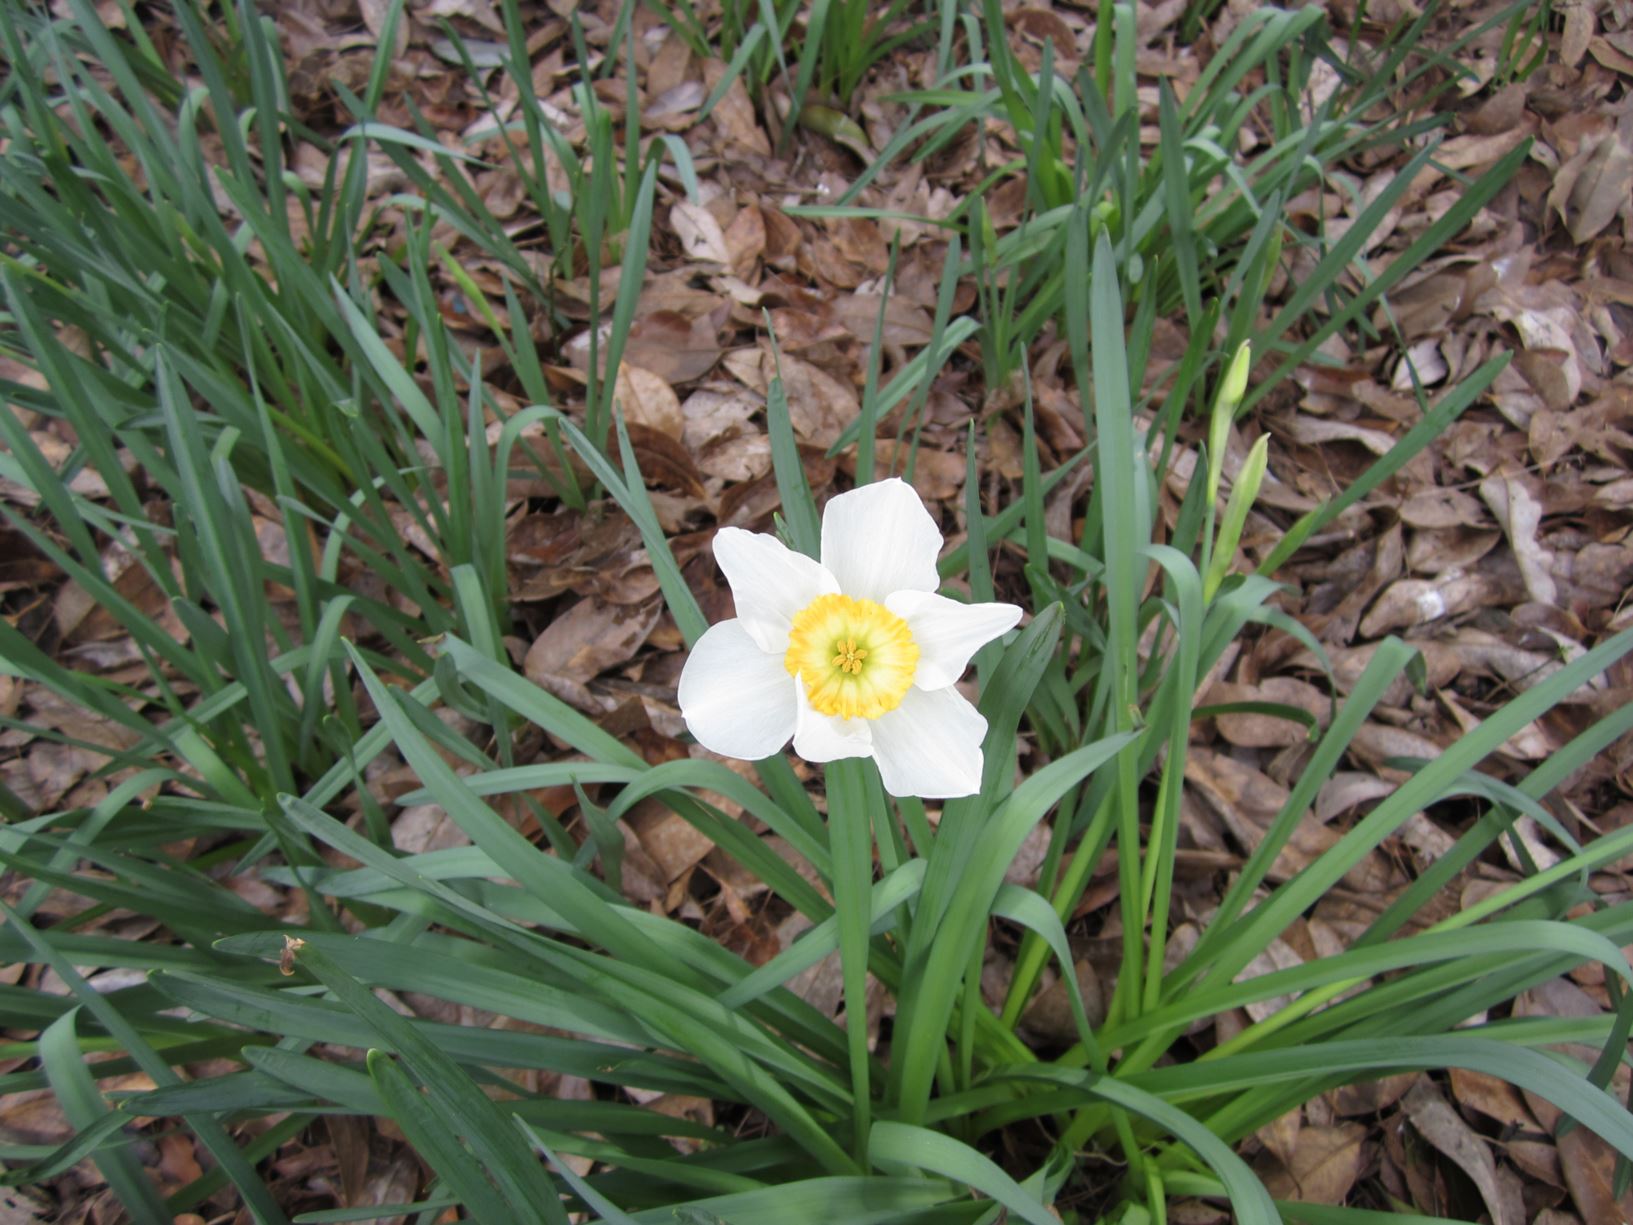 Narcissus 'Manon Lescaut' - large-cupped daffodil